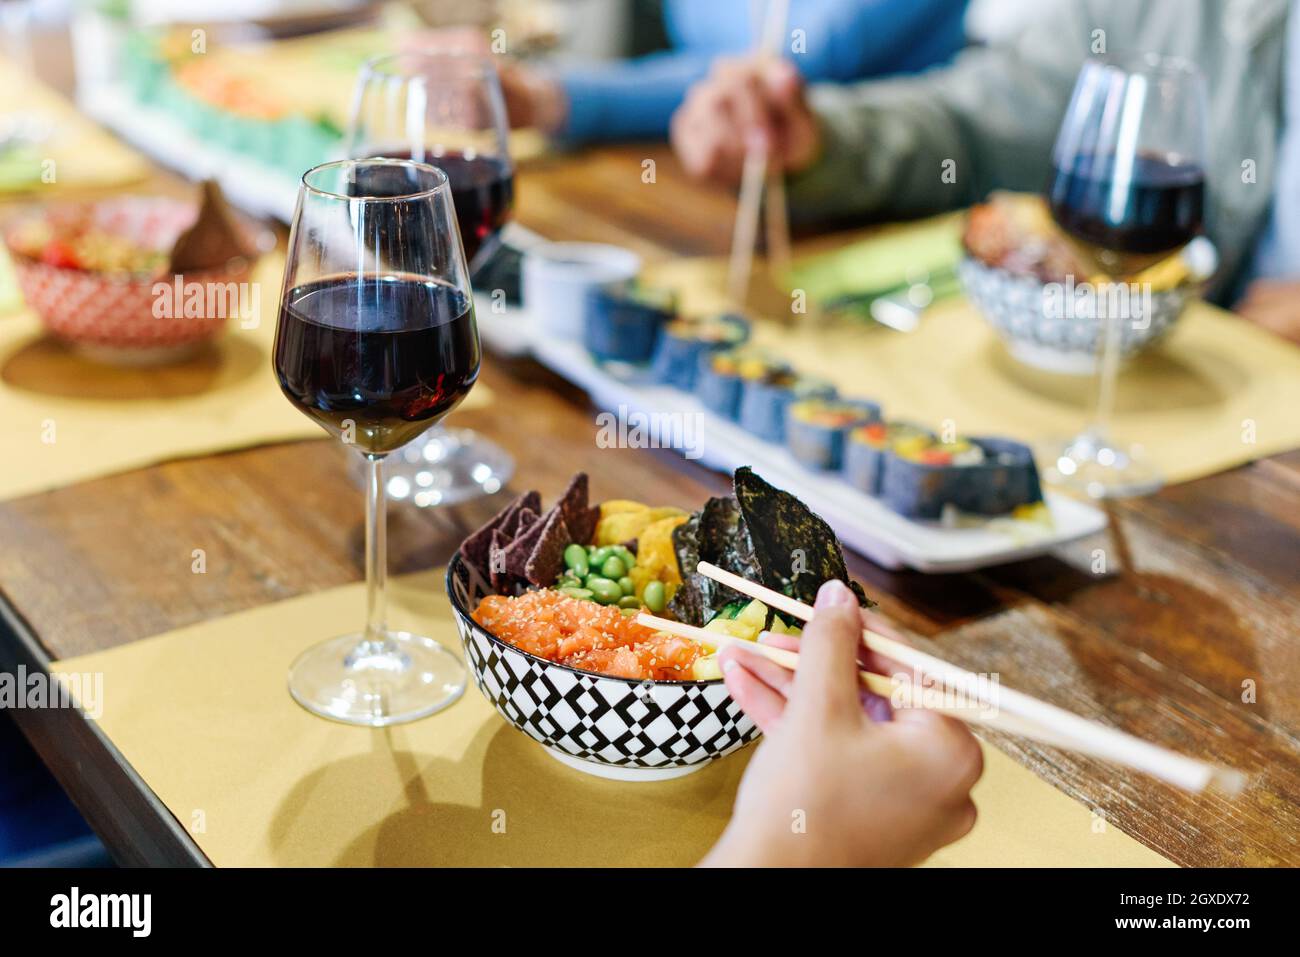 Person enjoying a bowl of poke or marinated seasoned raw fish with a glass of red wine in a restaurant with friends in a close up on the food Stock Photo